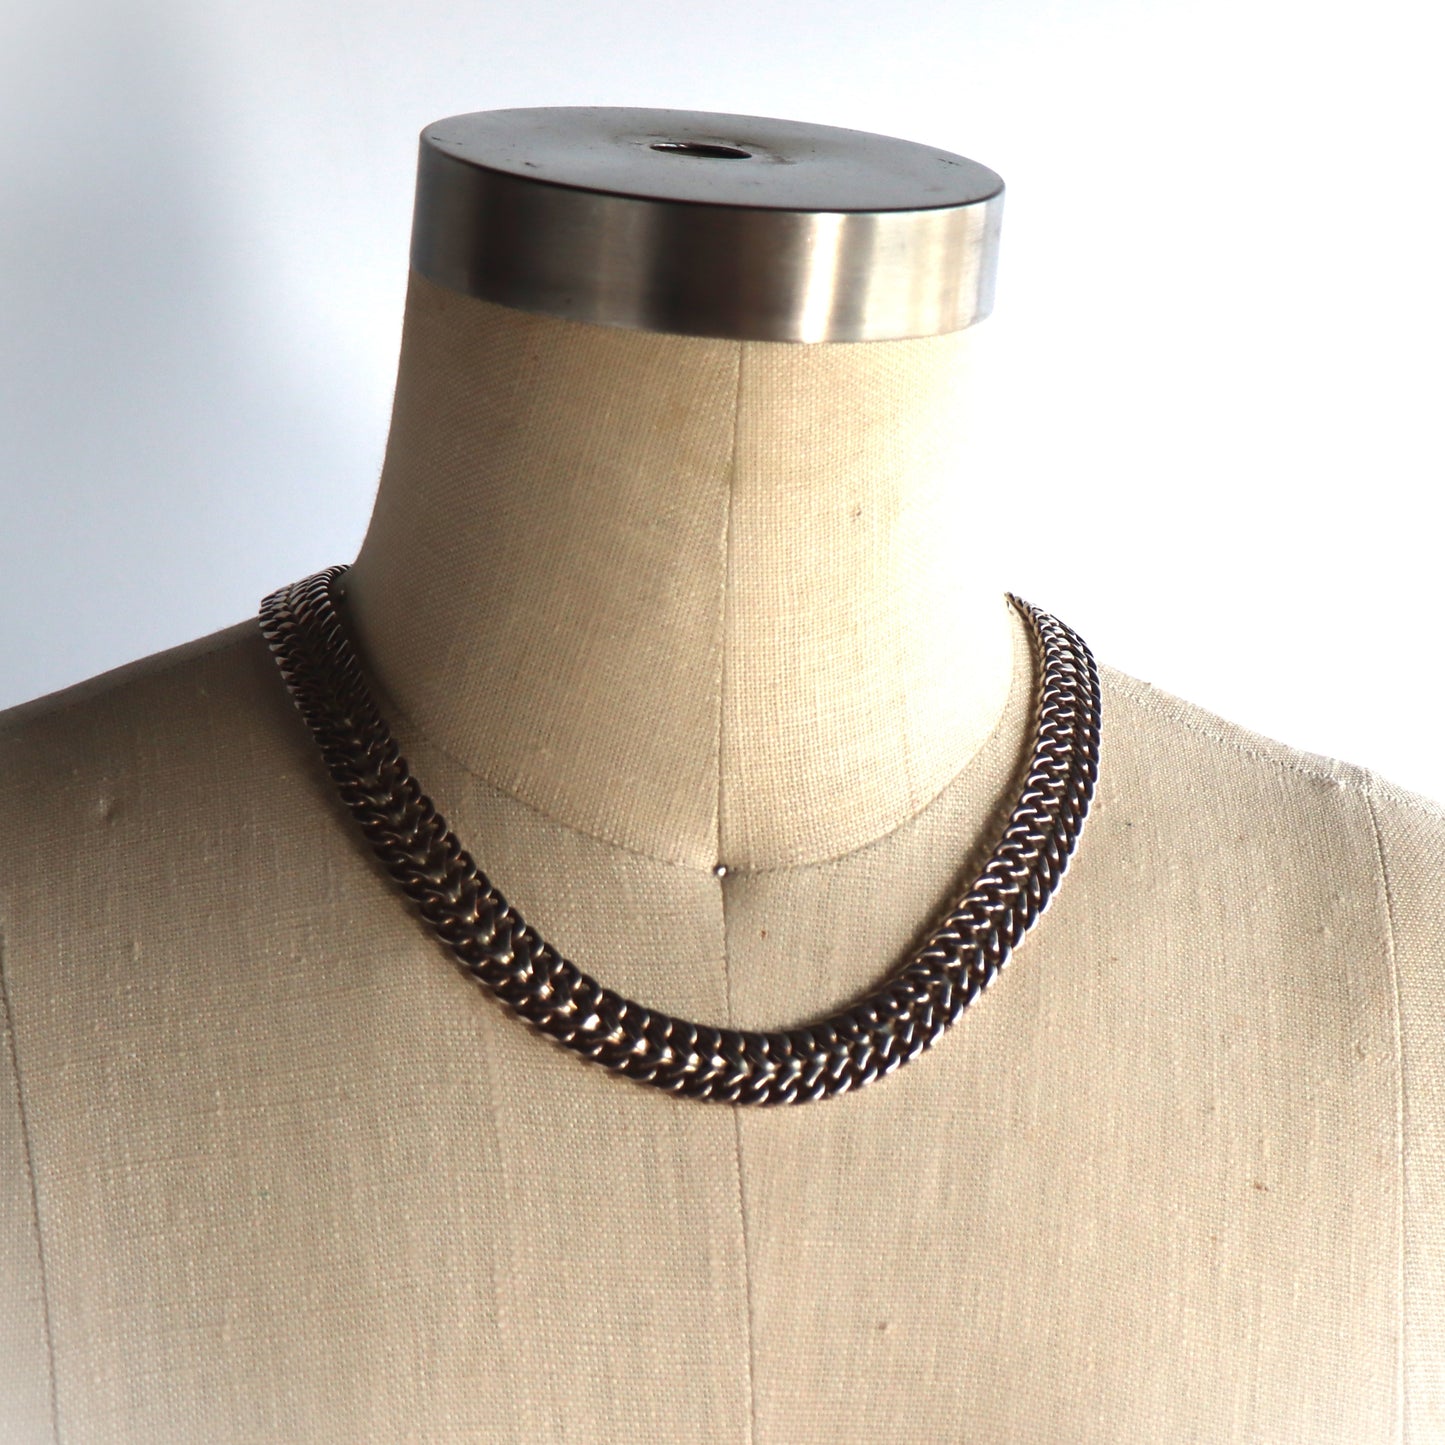 Vintage Sterling Silver Taxco Mexico Heavy Woven Link Collar Necklace c1975